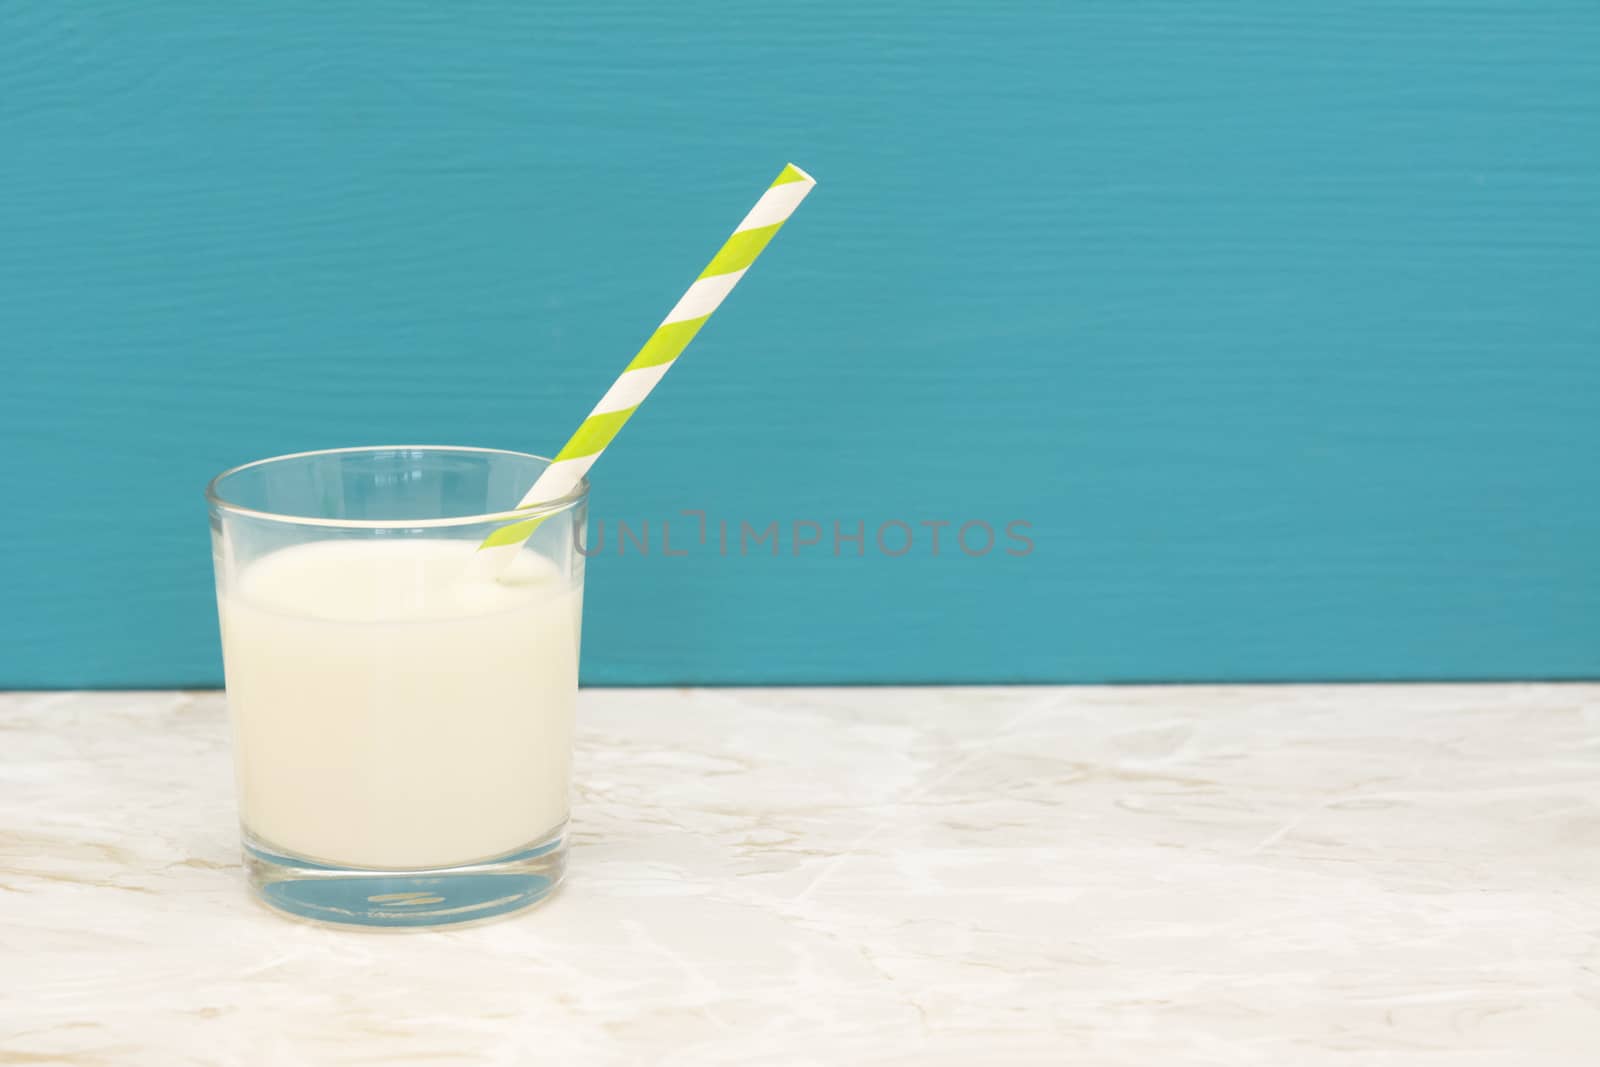 Creamy, fresh milk with a retro paper straw in a glass tumbler with a teal background and copy space